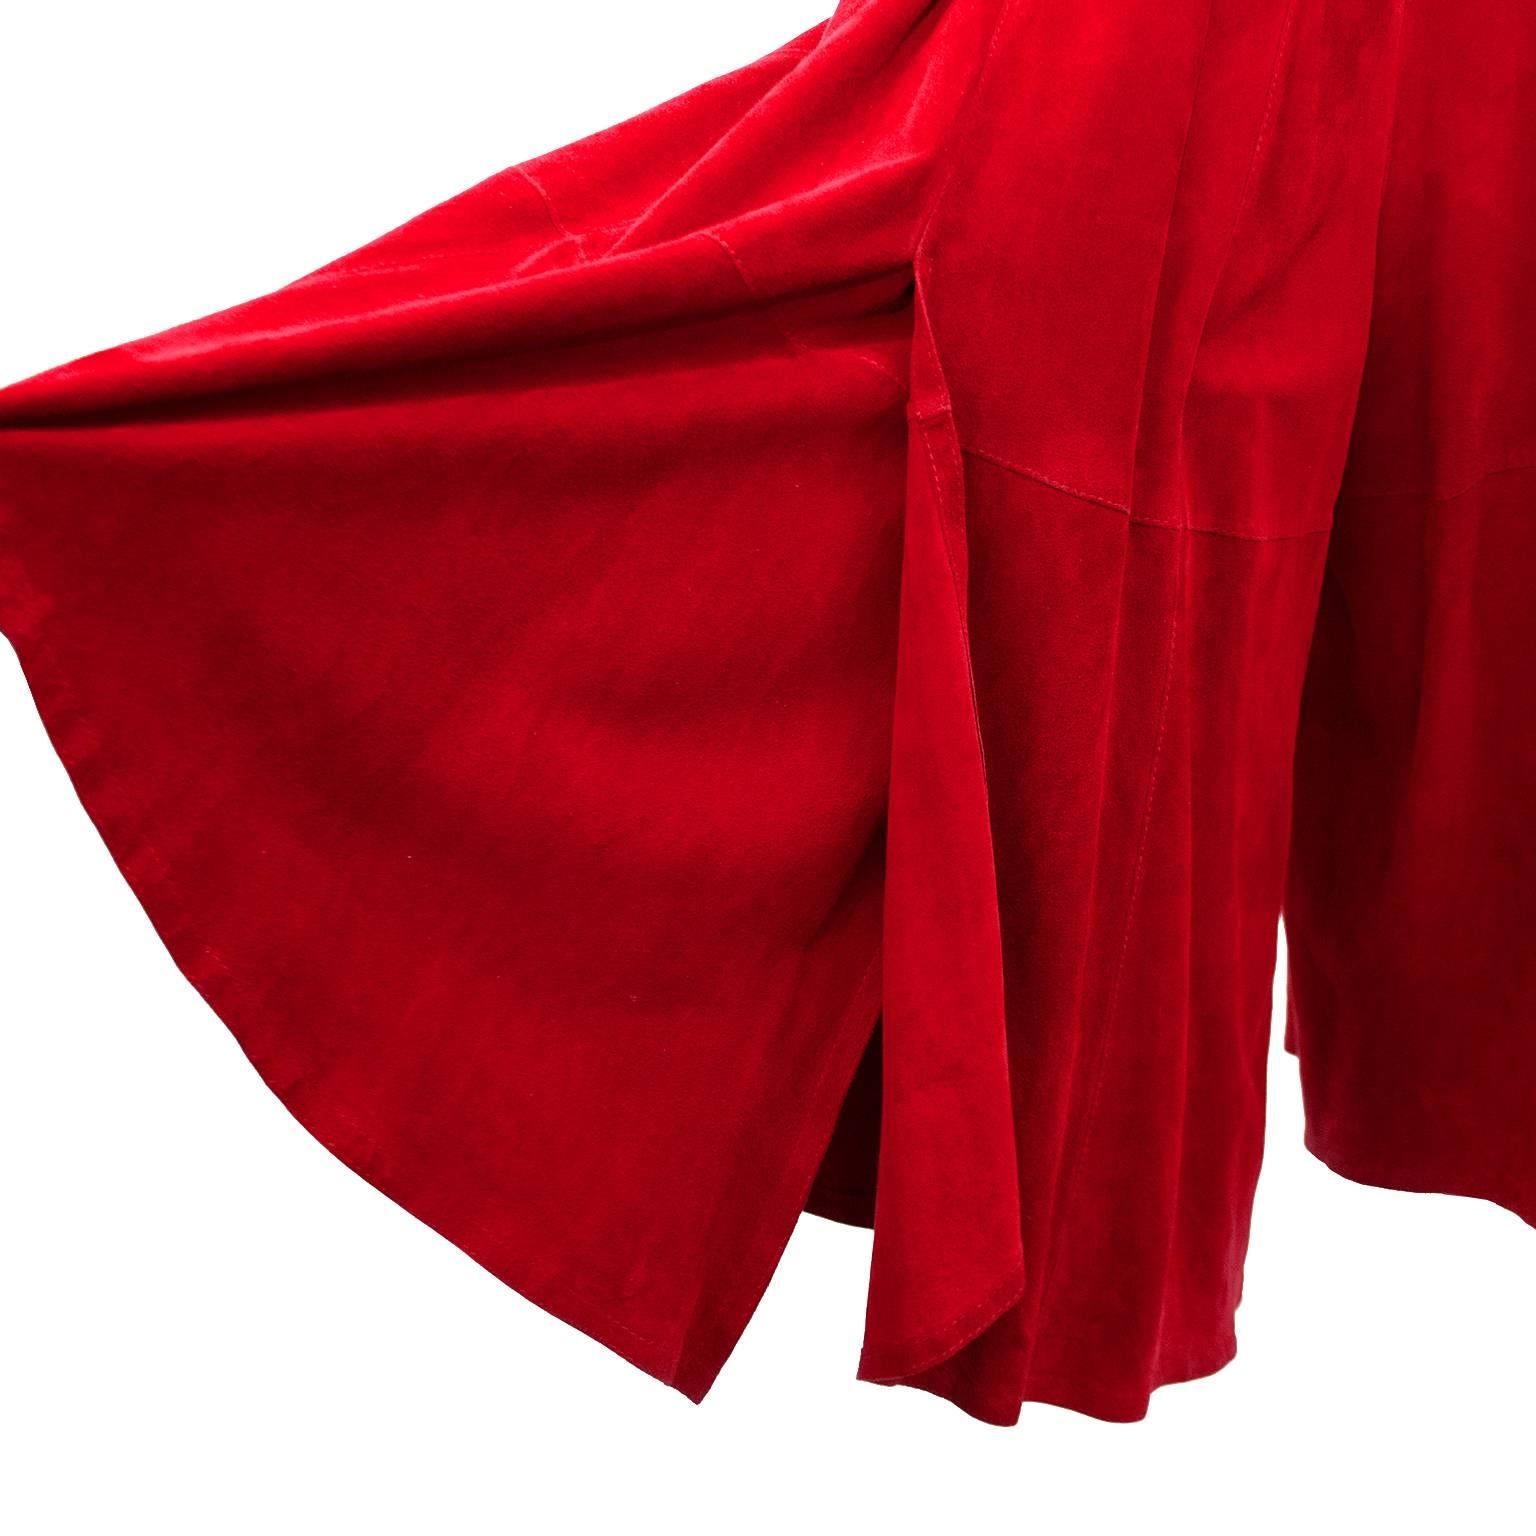 Women's 1980s Gianfranco Ferre Red Suede Culottes